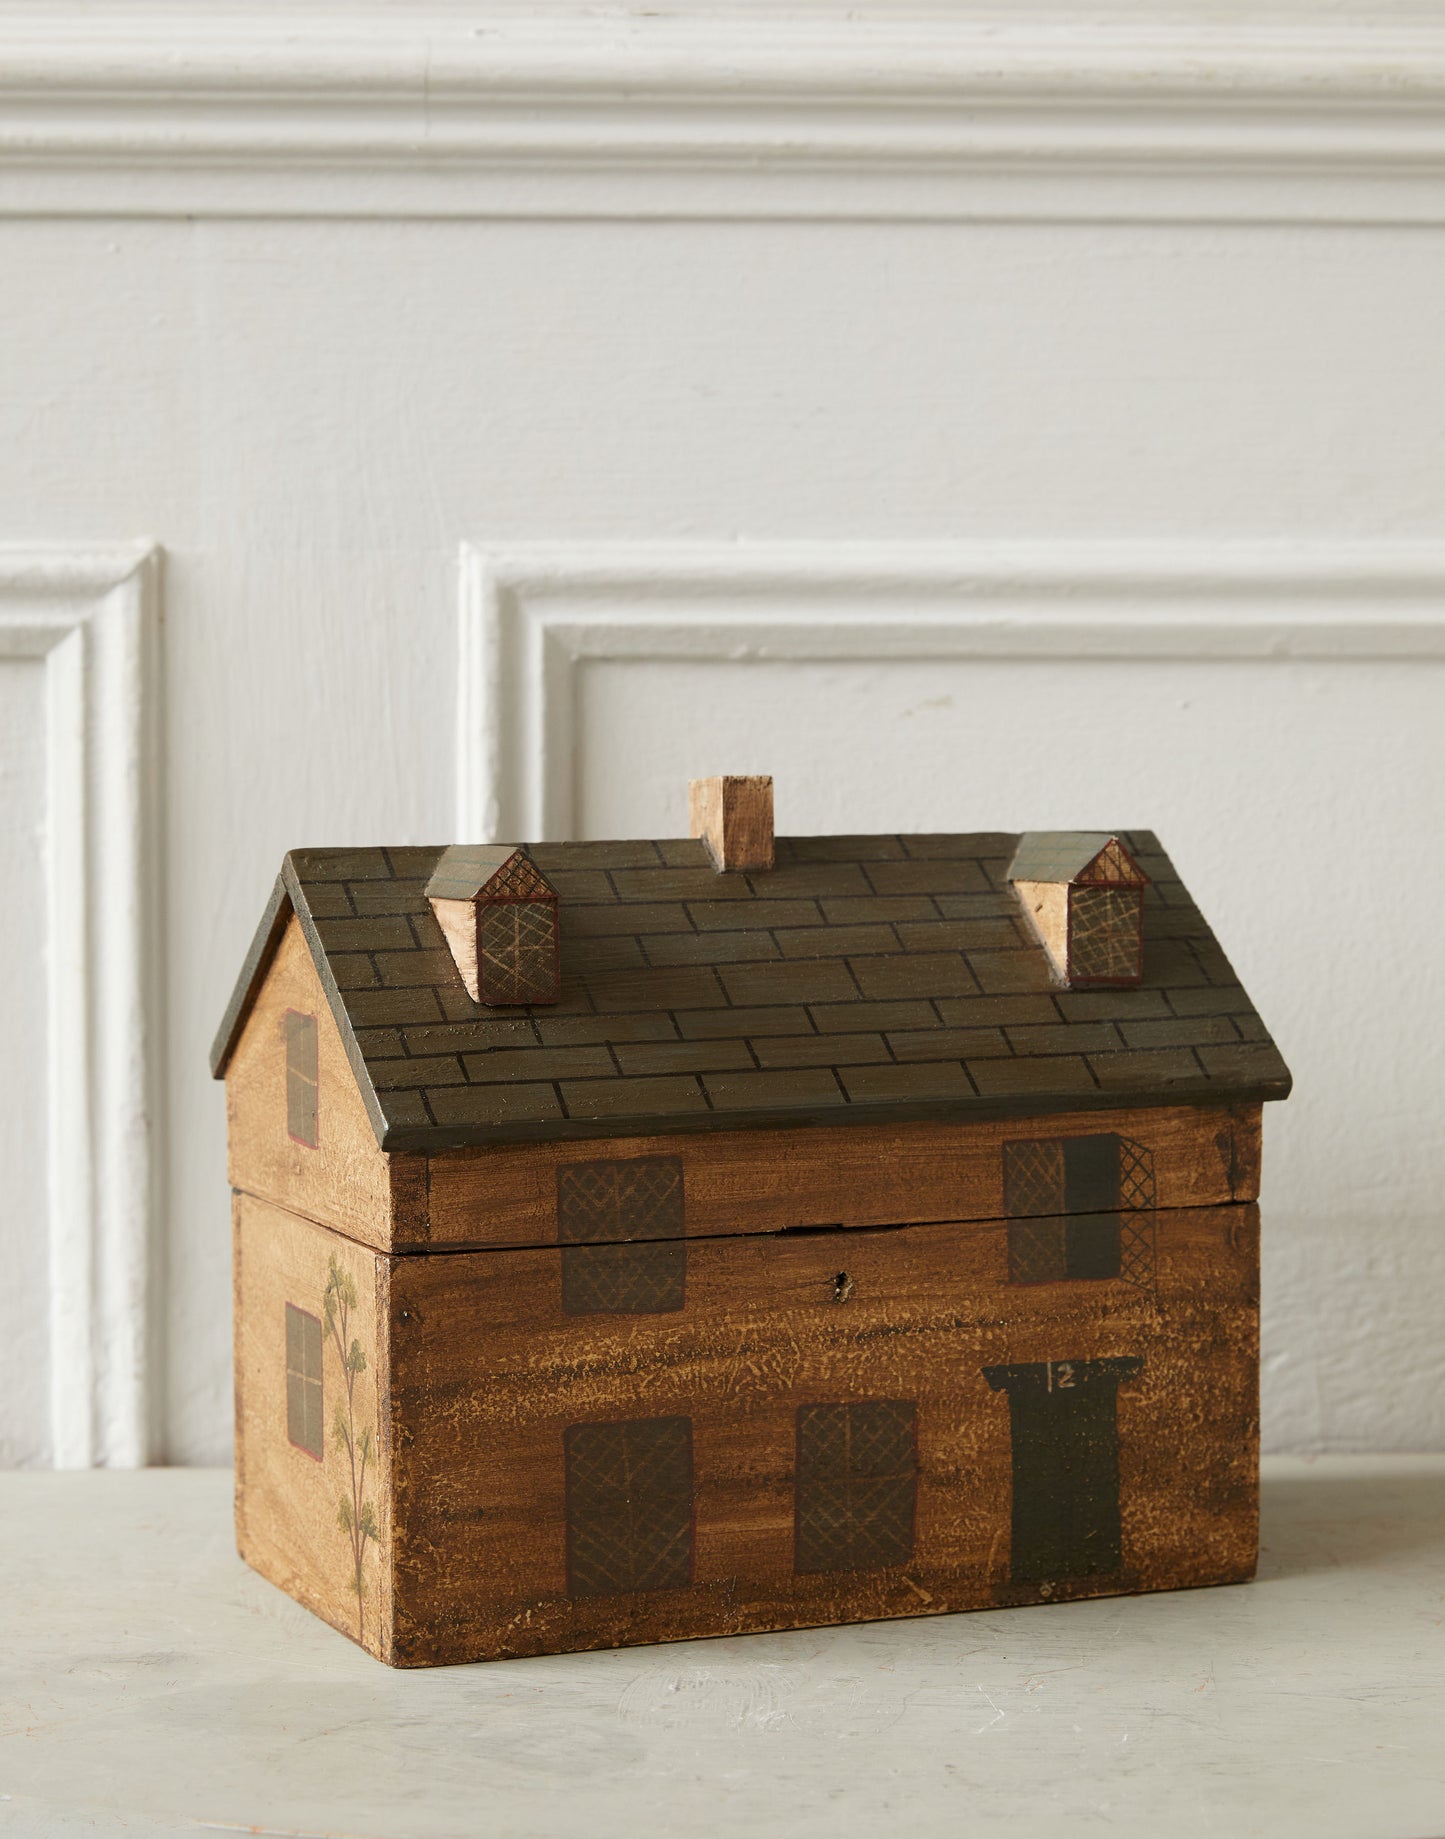 A Rare 'Folk Art' Early 19th Century Wooden Hand-Painted Tea Caddy in the Form of a Georgian House, Numbered 12